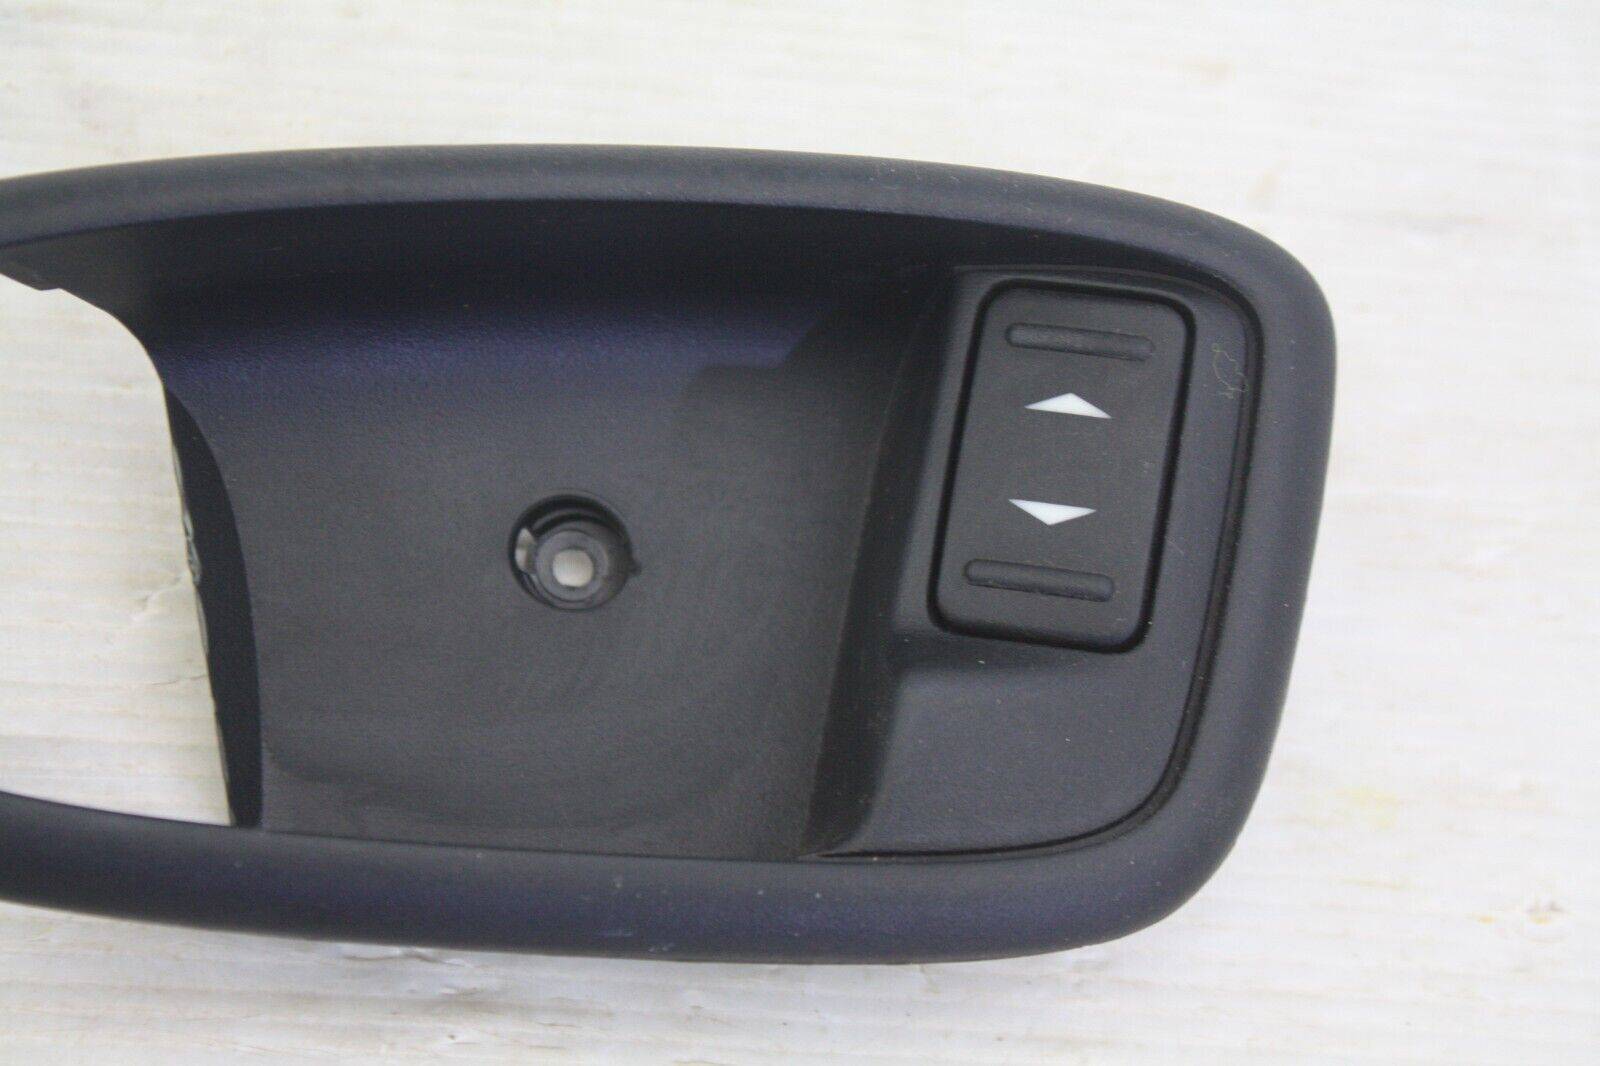 Ford-S-Max-Front-Left-Door-Handle-Surround-Trim-2010-to-2015-6M21-U226A37-BCW-176008398752-2